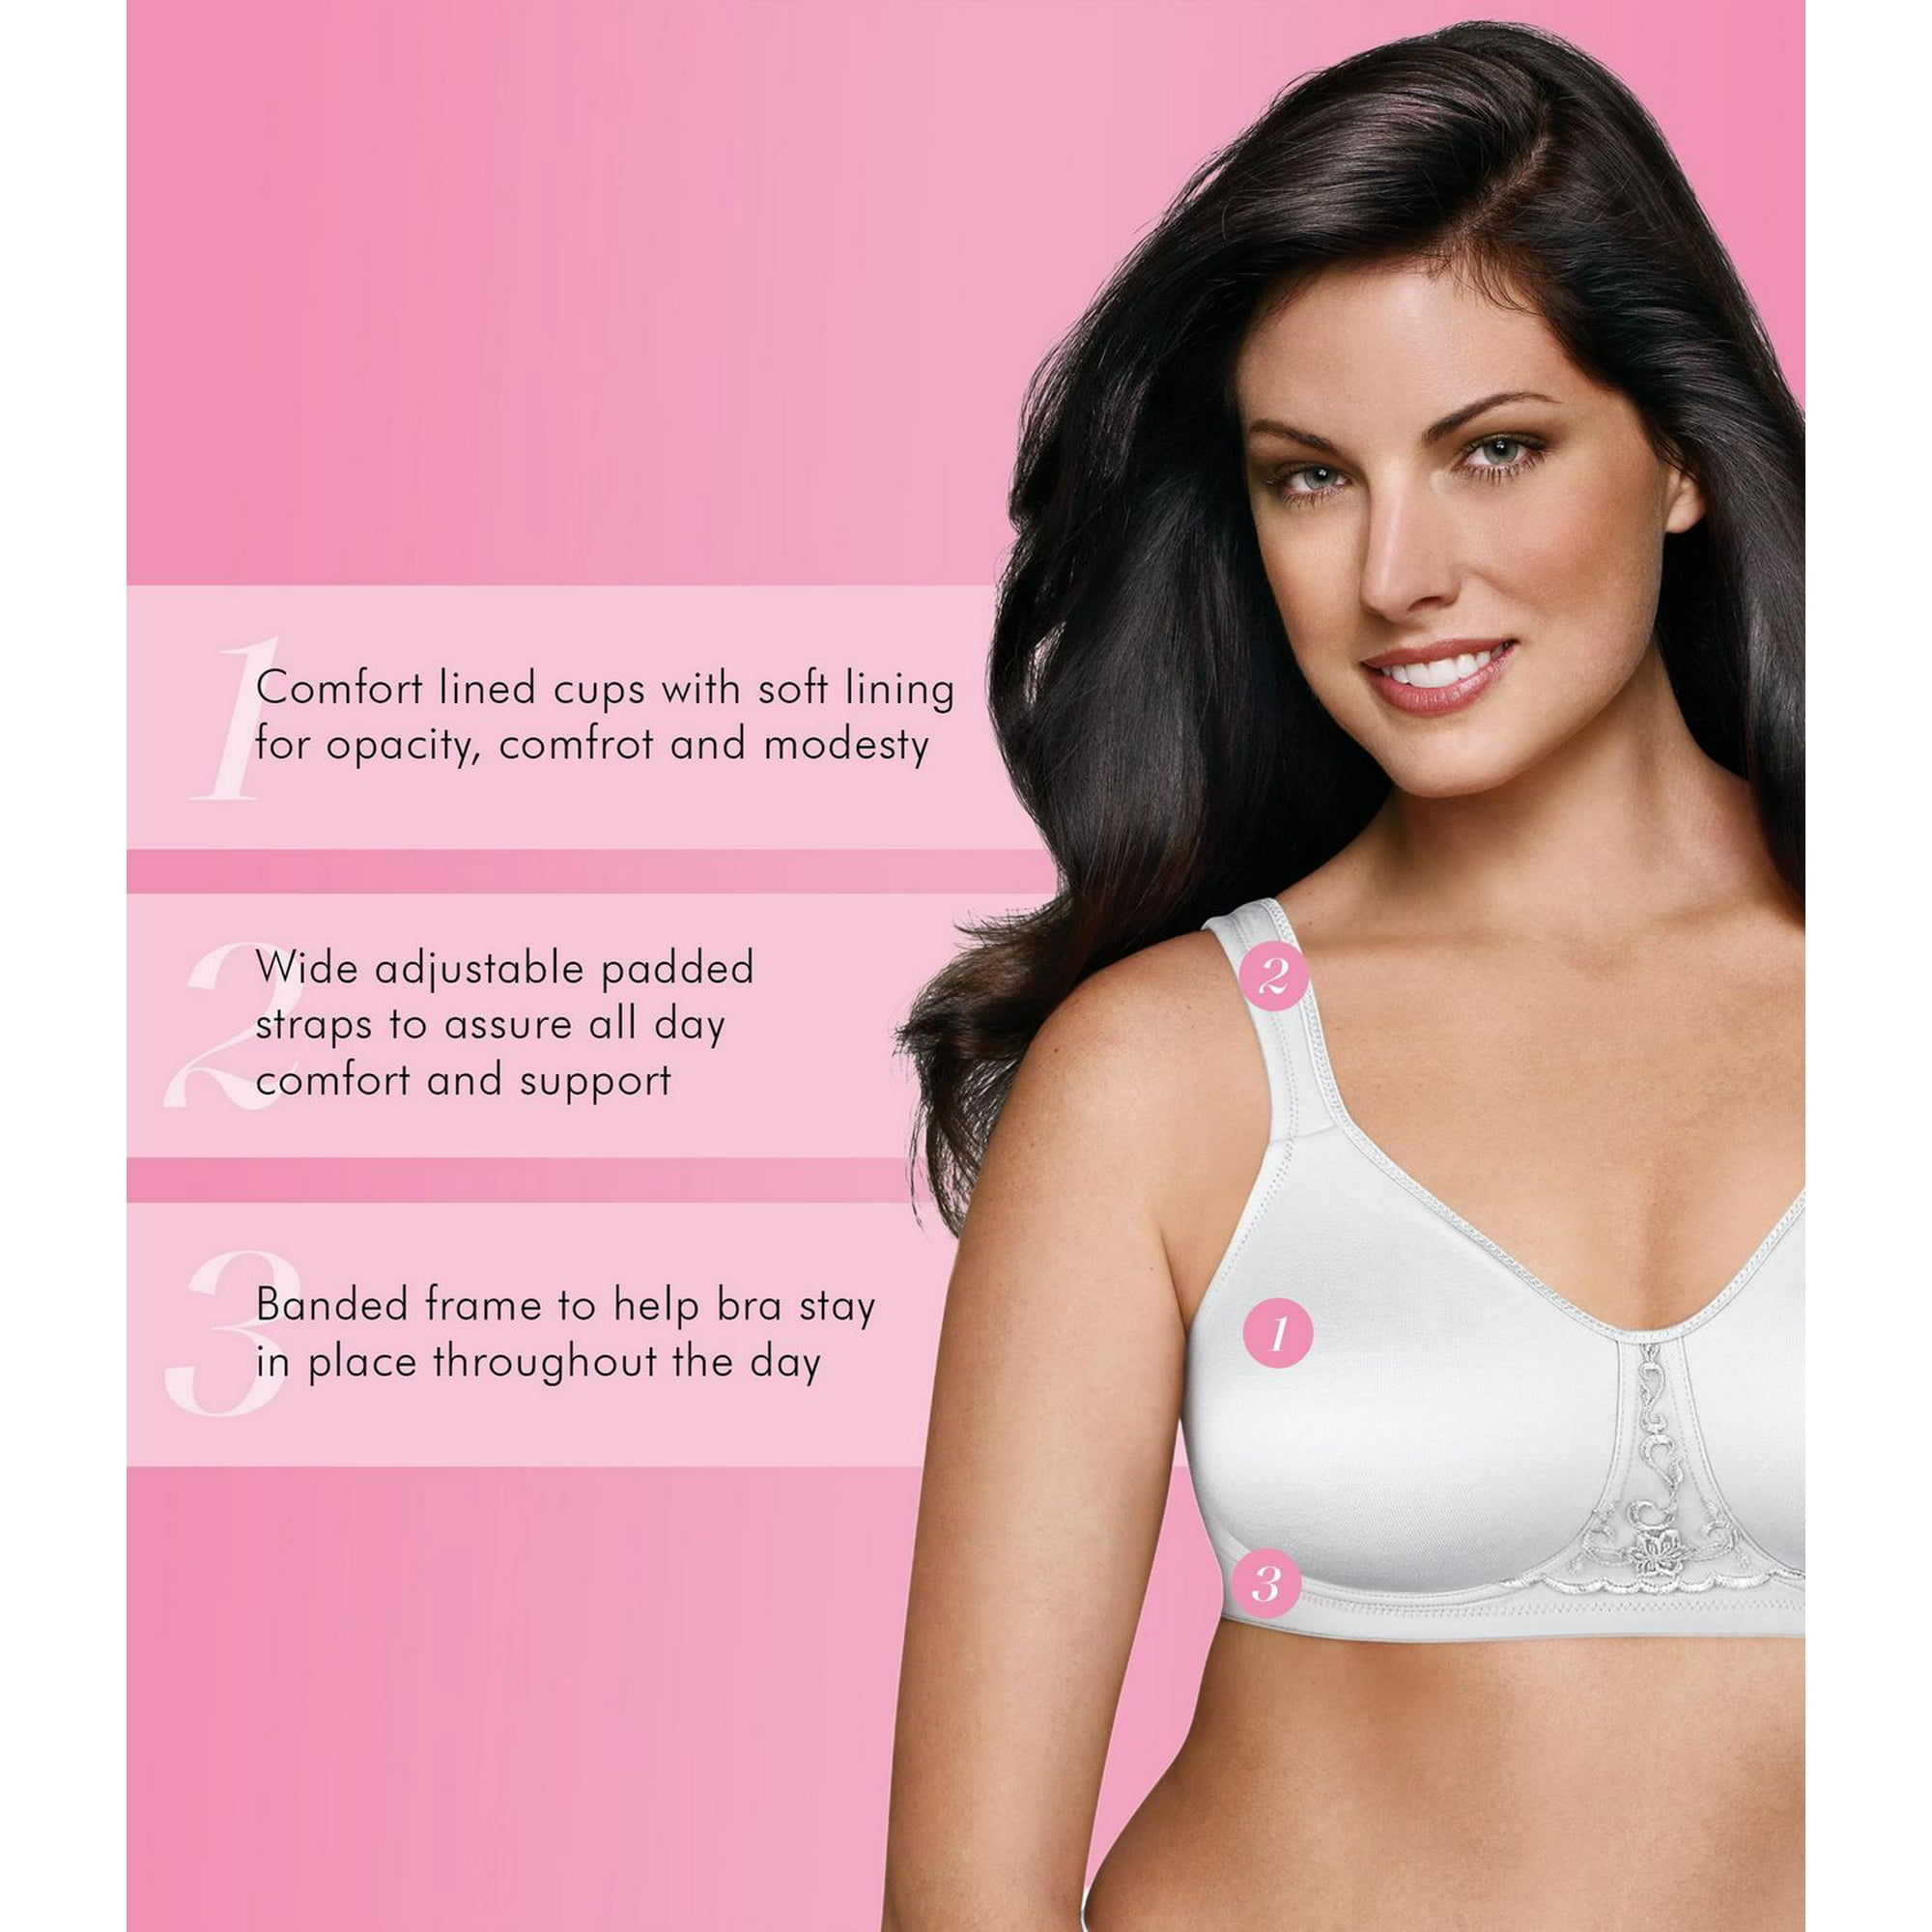 Exquisite Form #9671094 FULLY Full-Coverage Bra, Wire-Free, Available Sizes  40C - 48DDD 